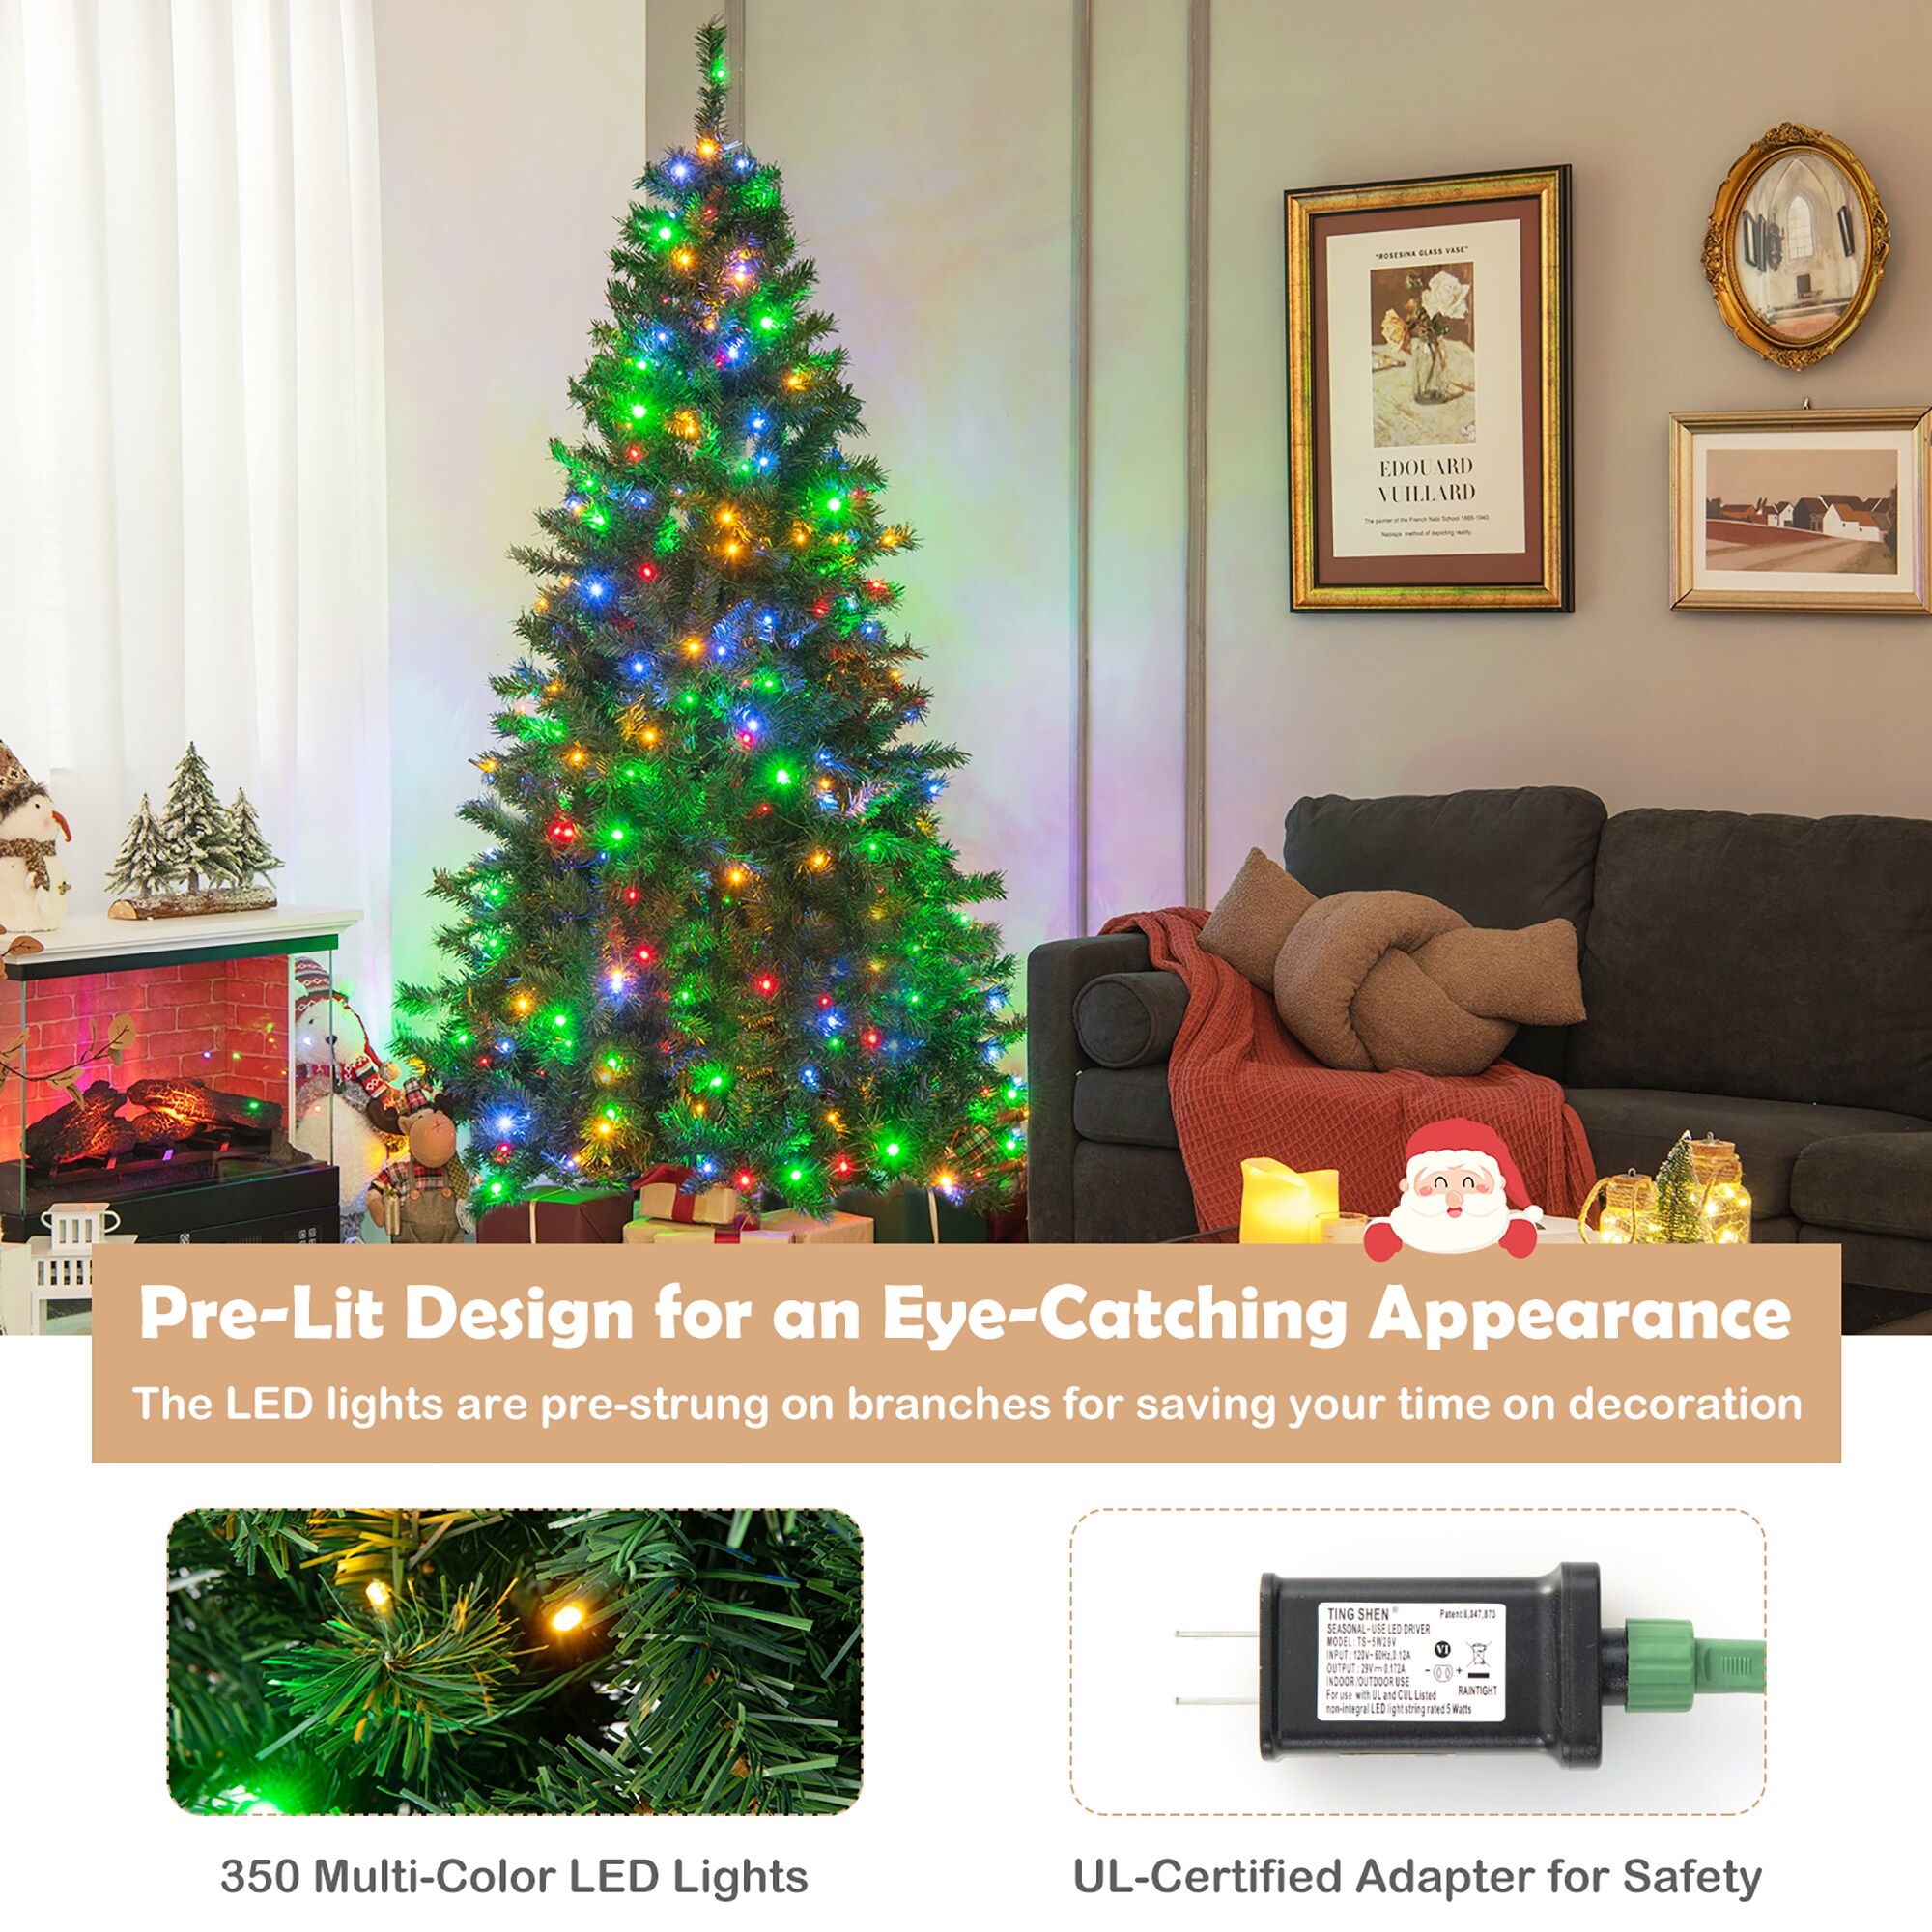 https://ak1.ostkcdn.com/images/products/is/images/direct/0e5c6aaf569764fefbd897b26e67854c1aa37cb2/Costway-6FT-7FT-Pre-Lit-Hinged-Christmas-Tree-with-260-350-Multi-Color.jpg